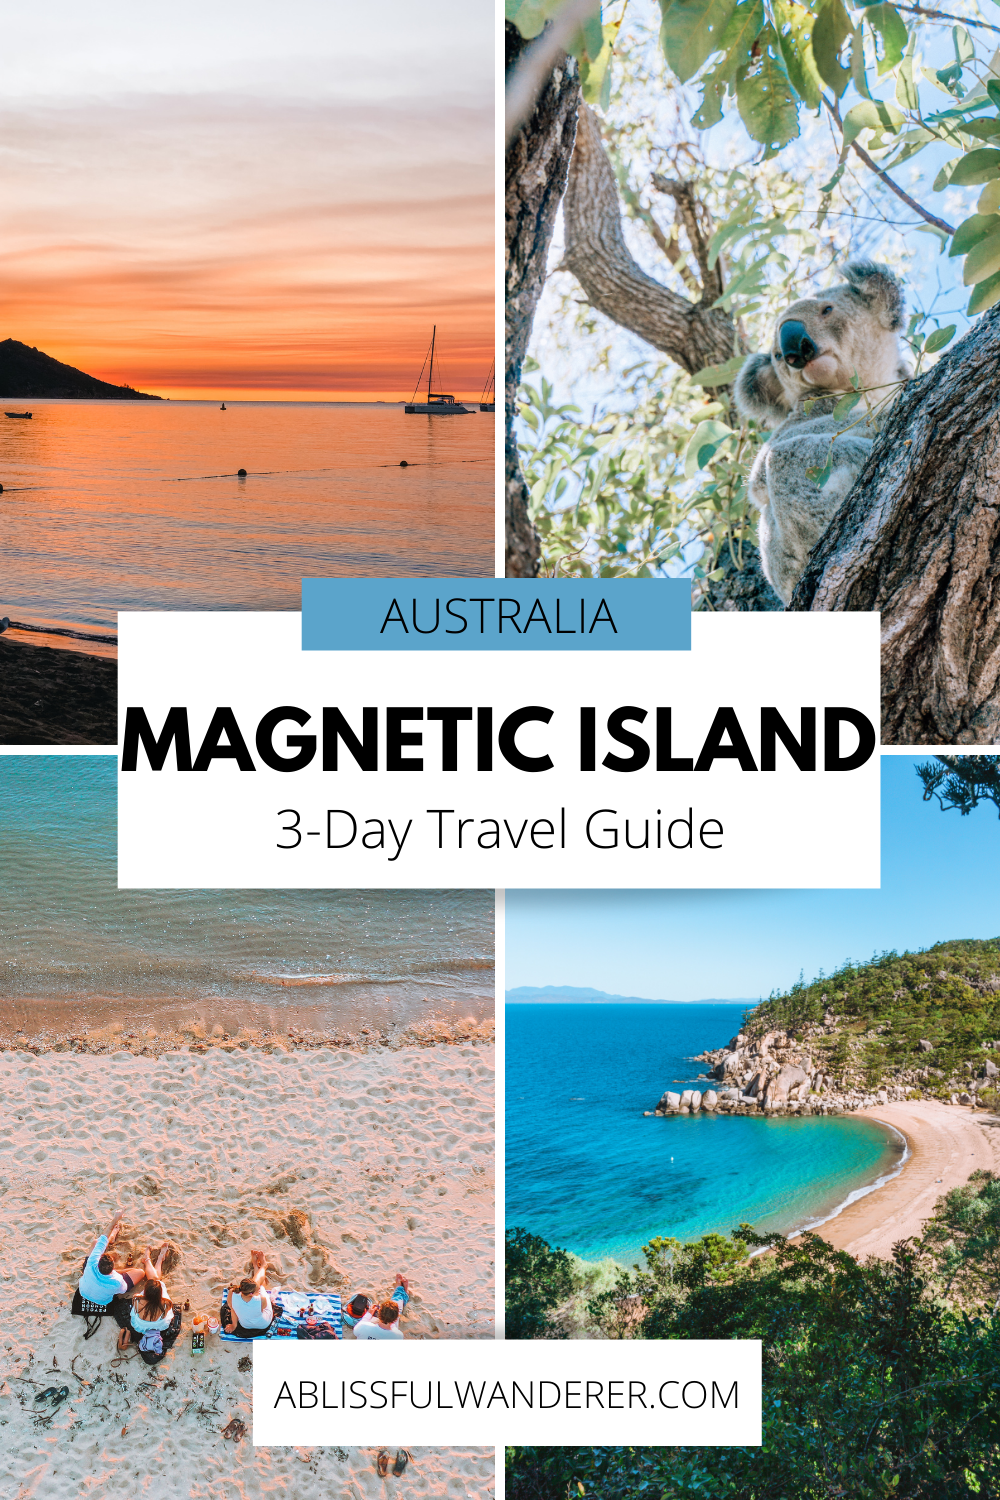 The Best 3-Day Magnetic Island Travel Guide